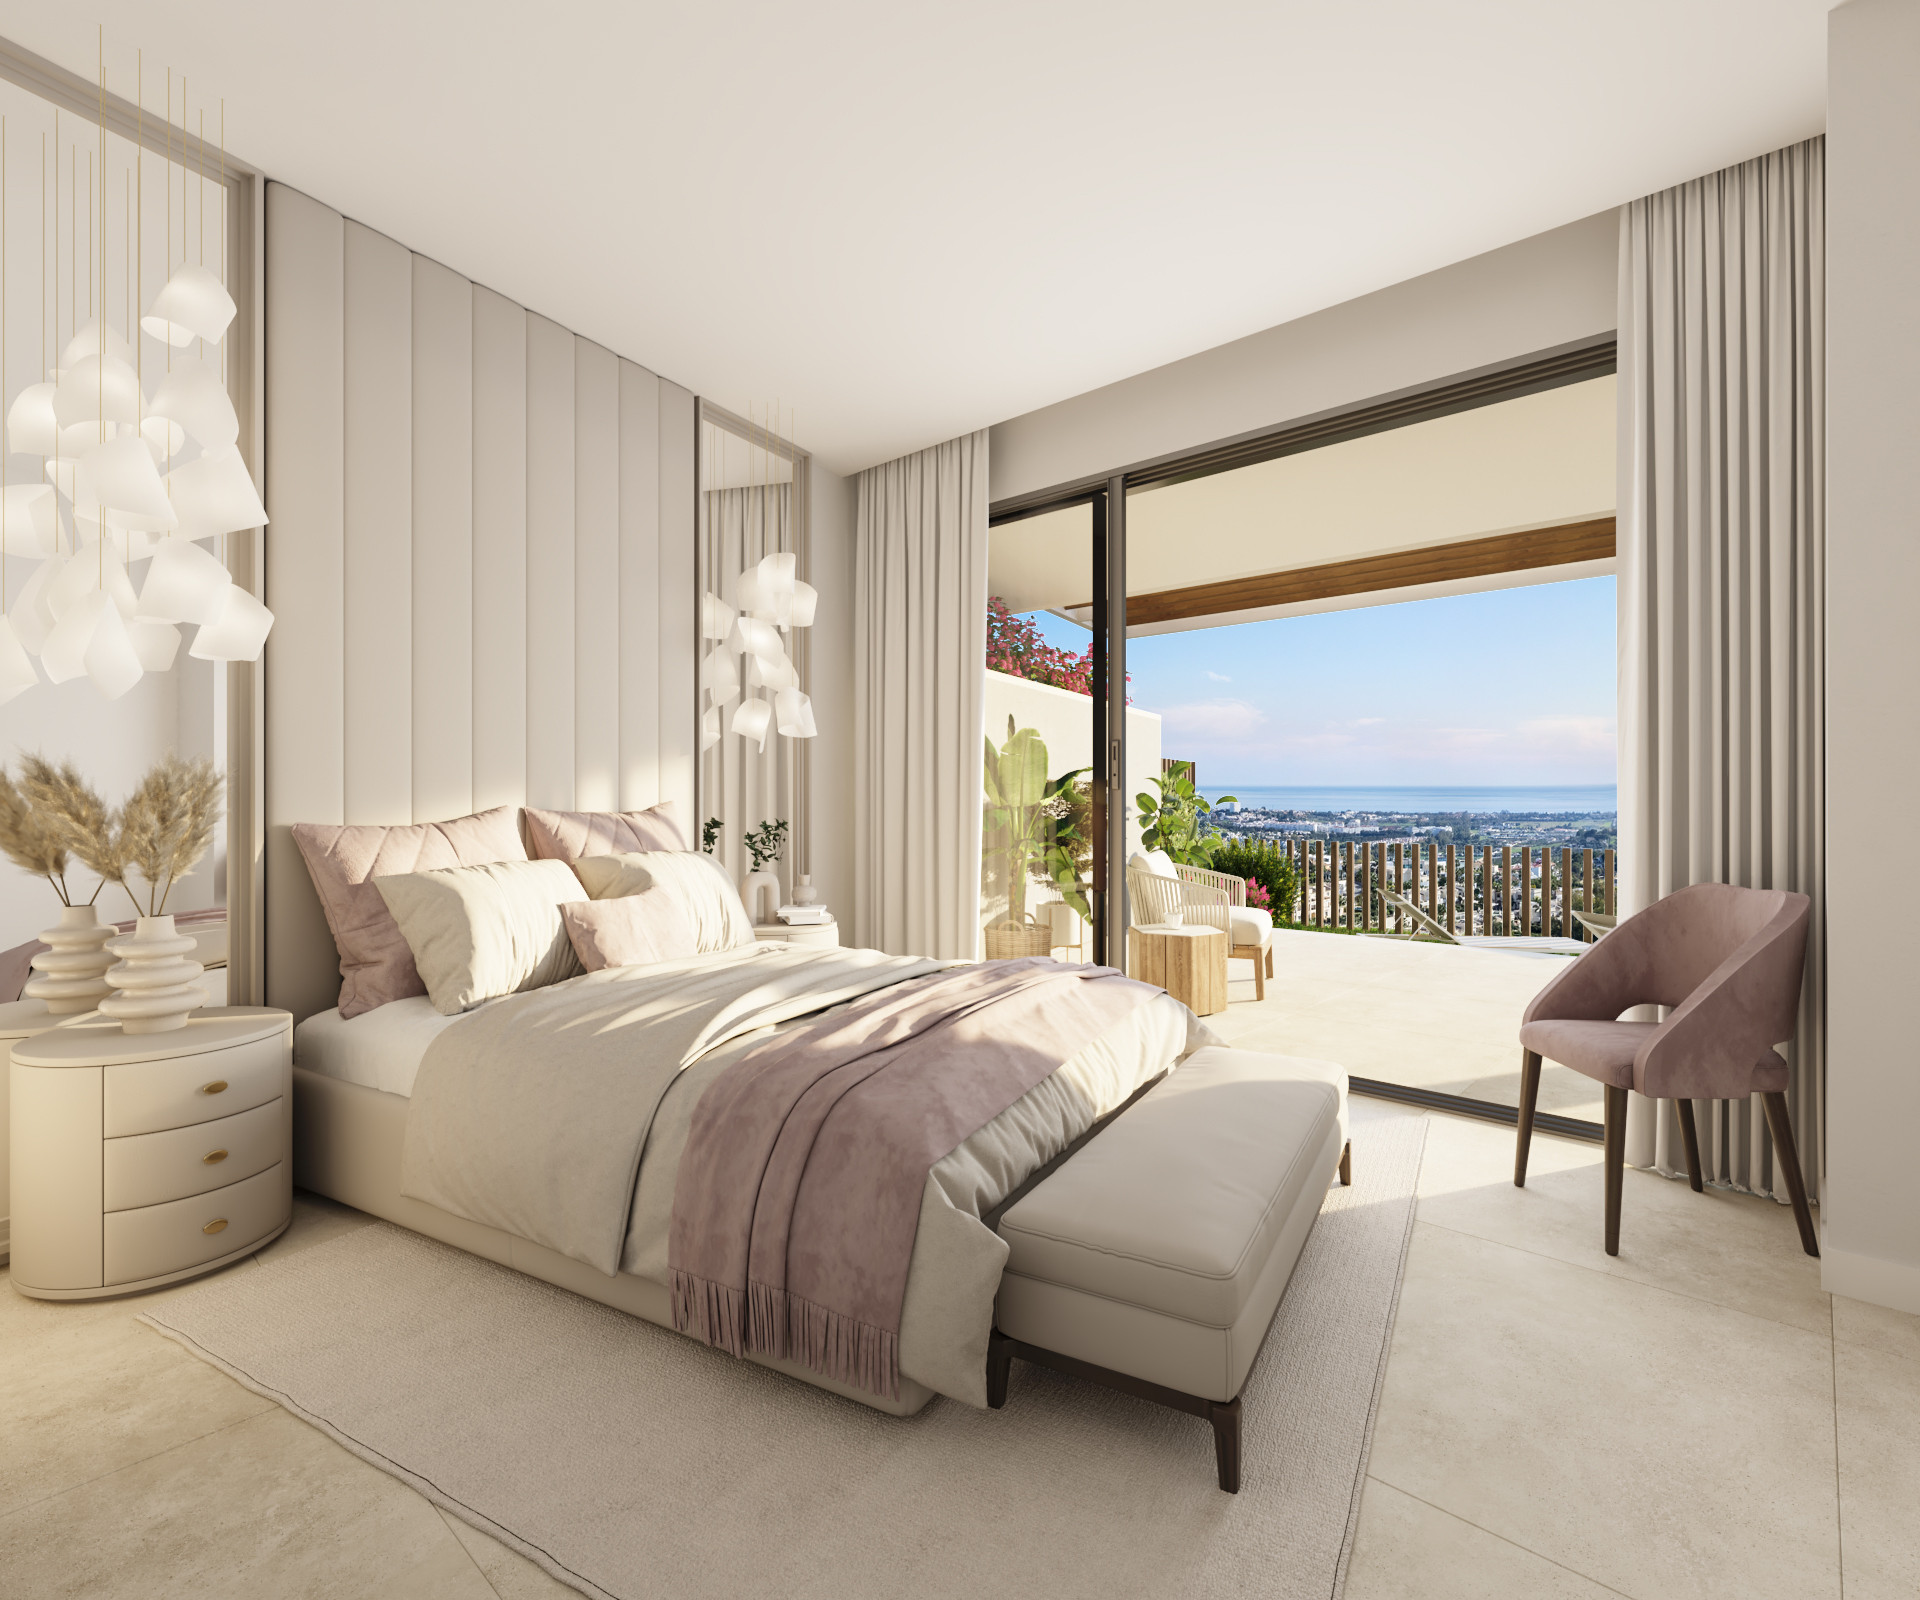 Tiara: Complex of 3 and 4 bedroom apartments with panoramic sea views over the Golf Valley | Image 19